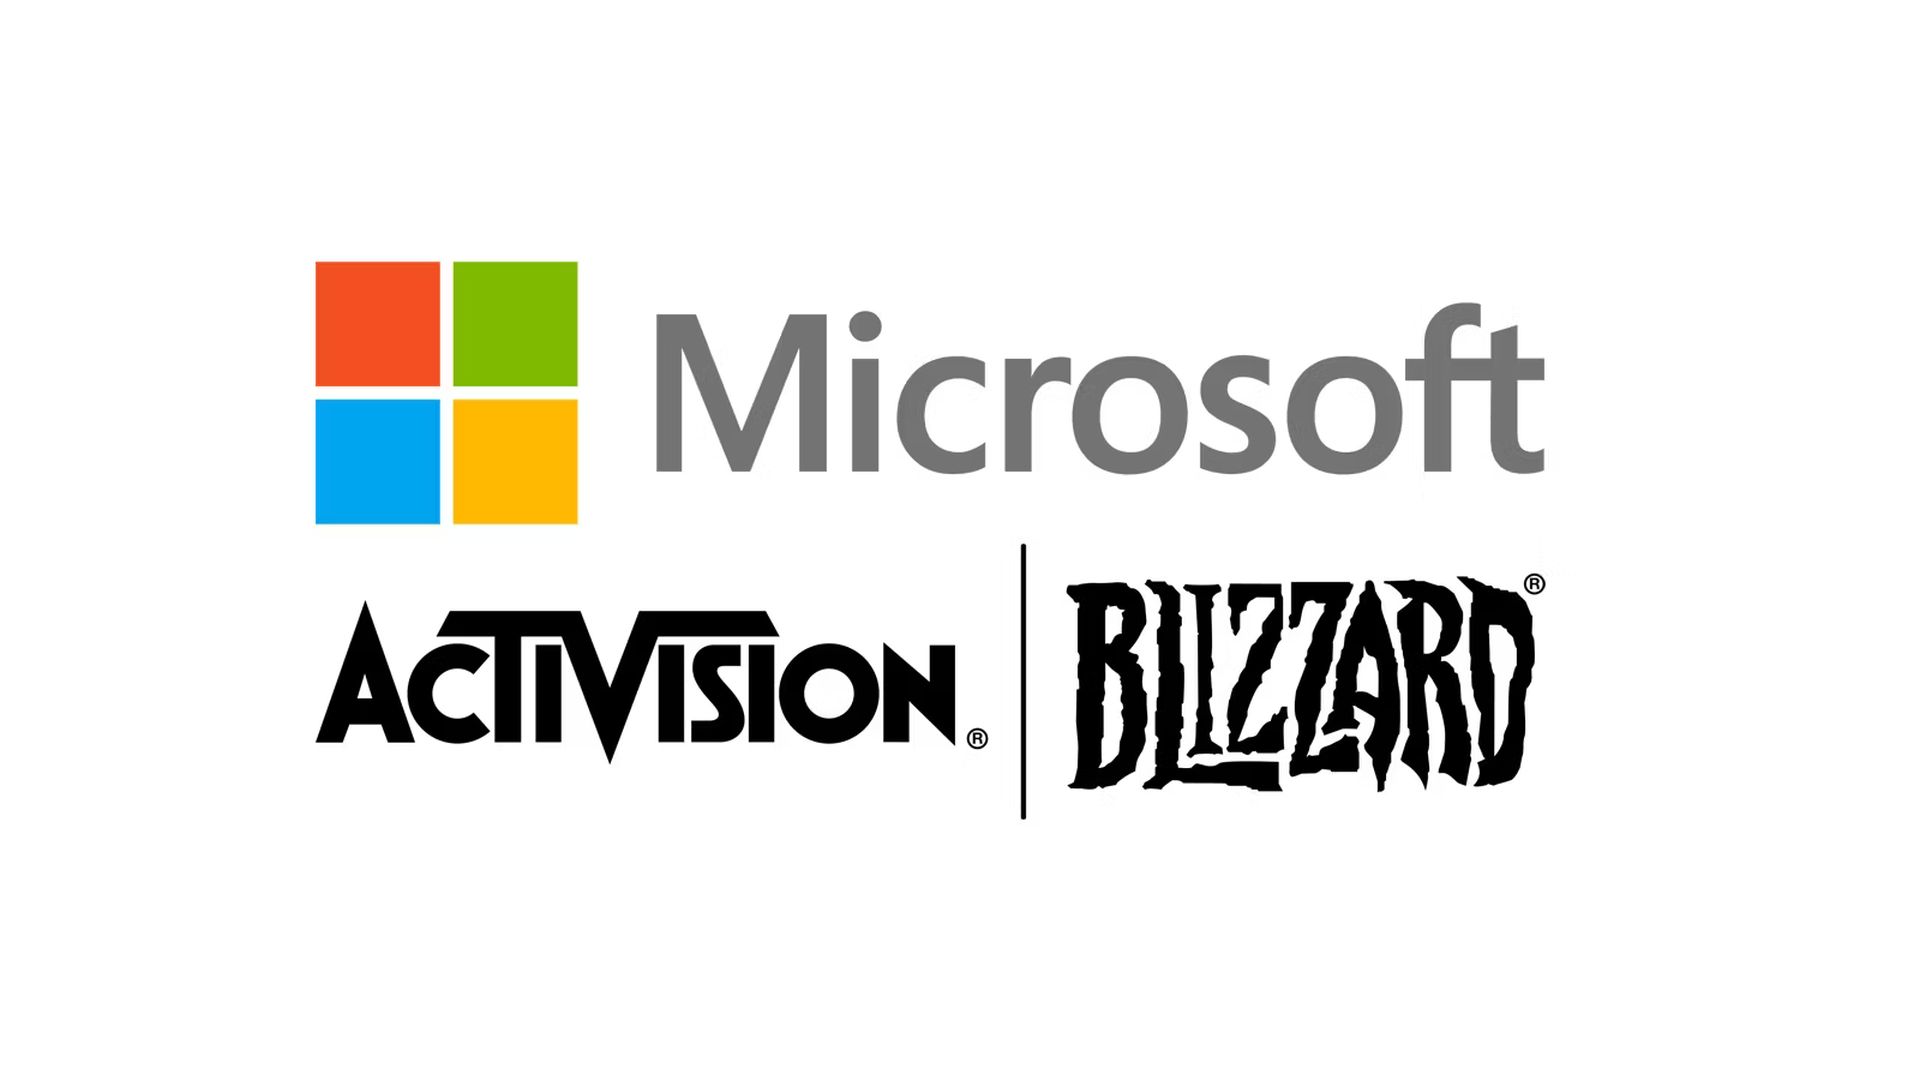 Activision Was Already Planning “Significant” Layoffs Independently of Acquisition, Microsoft Says